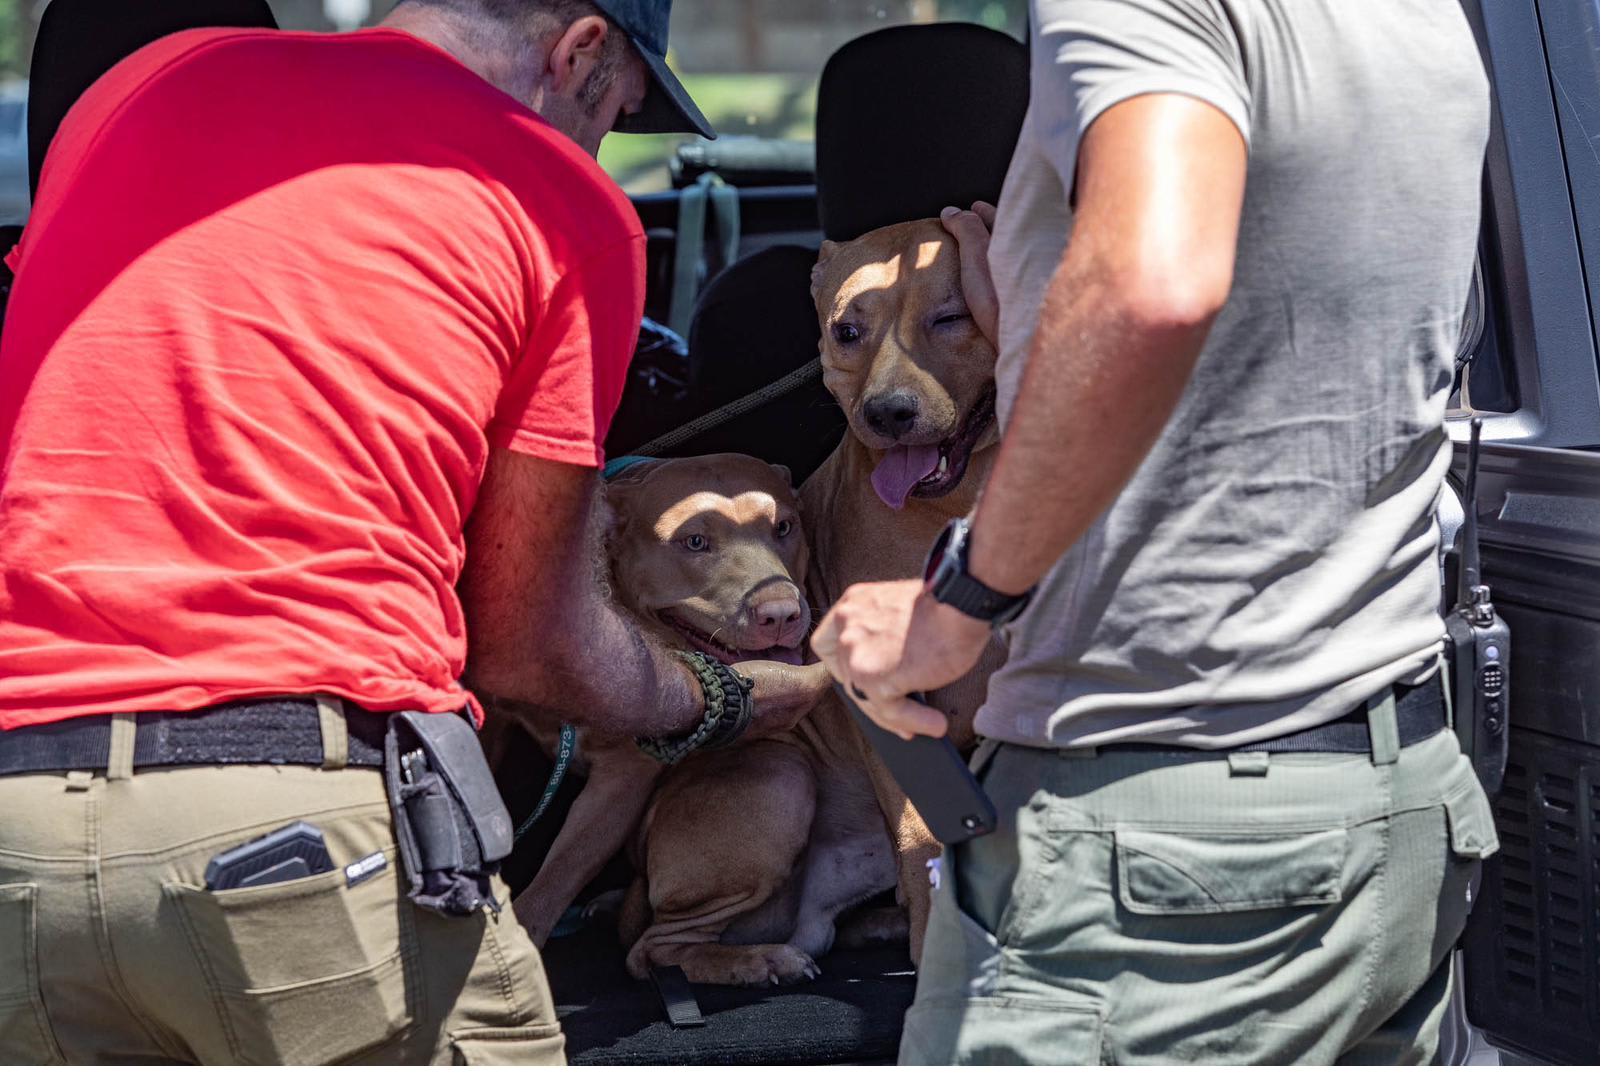 Veterinarians andMaui Humane helping dogs in Maui